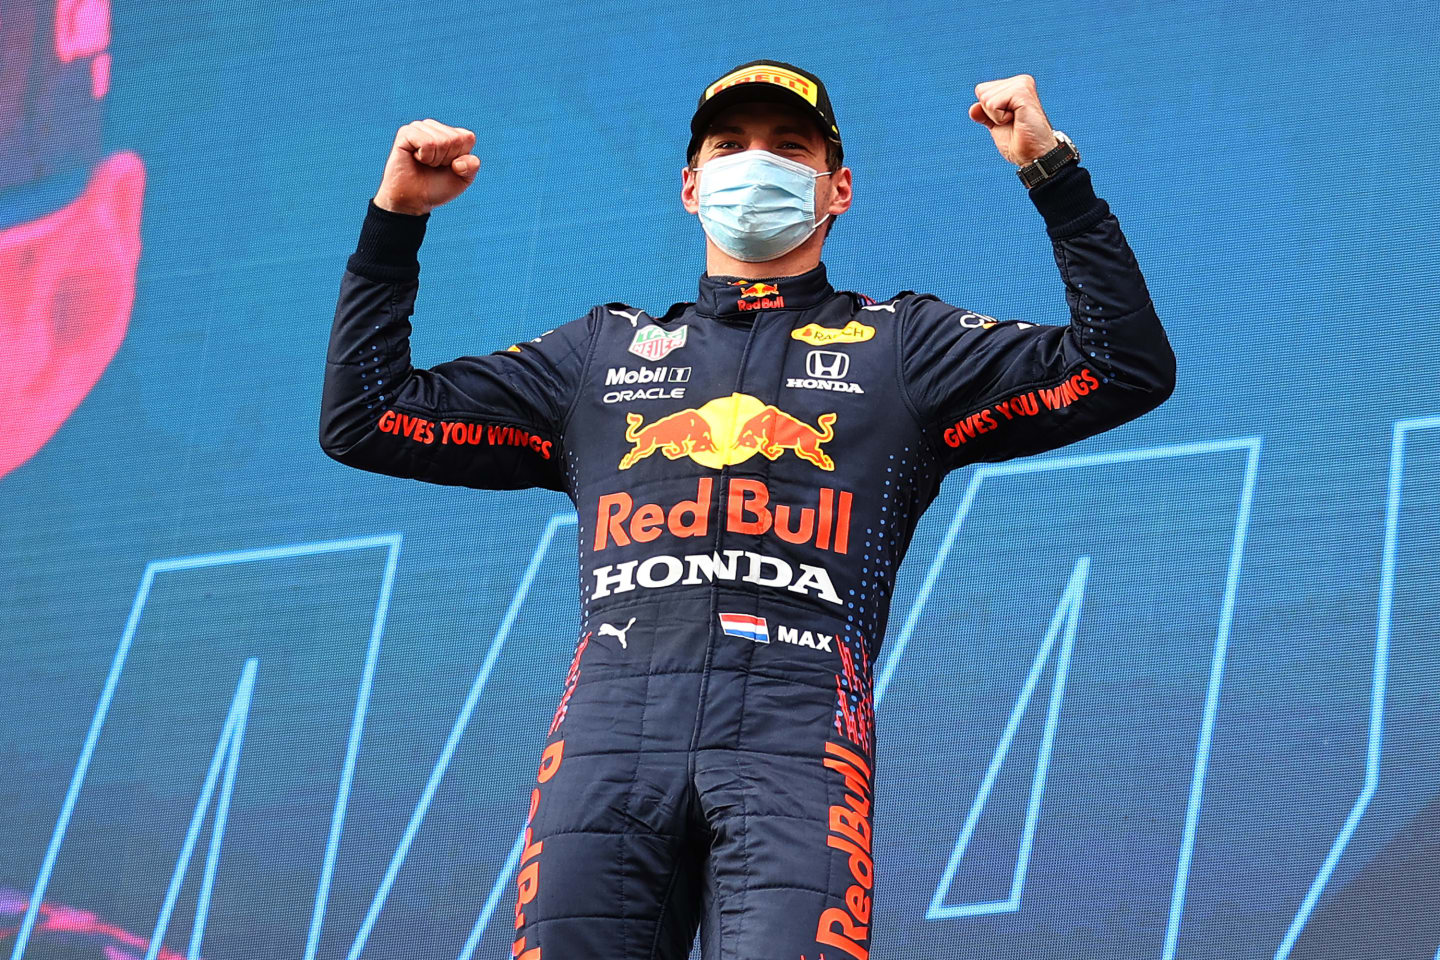 IMOLA, ITALY - APRIL 18: Race winner Max Verstappen of Netherlands and Red Bull Racing celebrates on the podium during the F1 Grand Prix of Emilia Romagna at Autodromo Enzo e Dino Ferrari on April 18, 2021 in Imola, Italy. (Photo by Bryn Lennon/Getty Images)